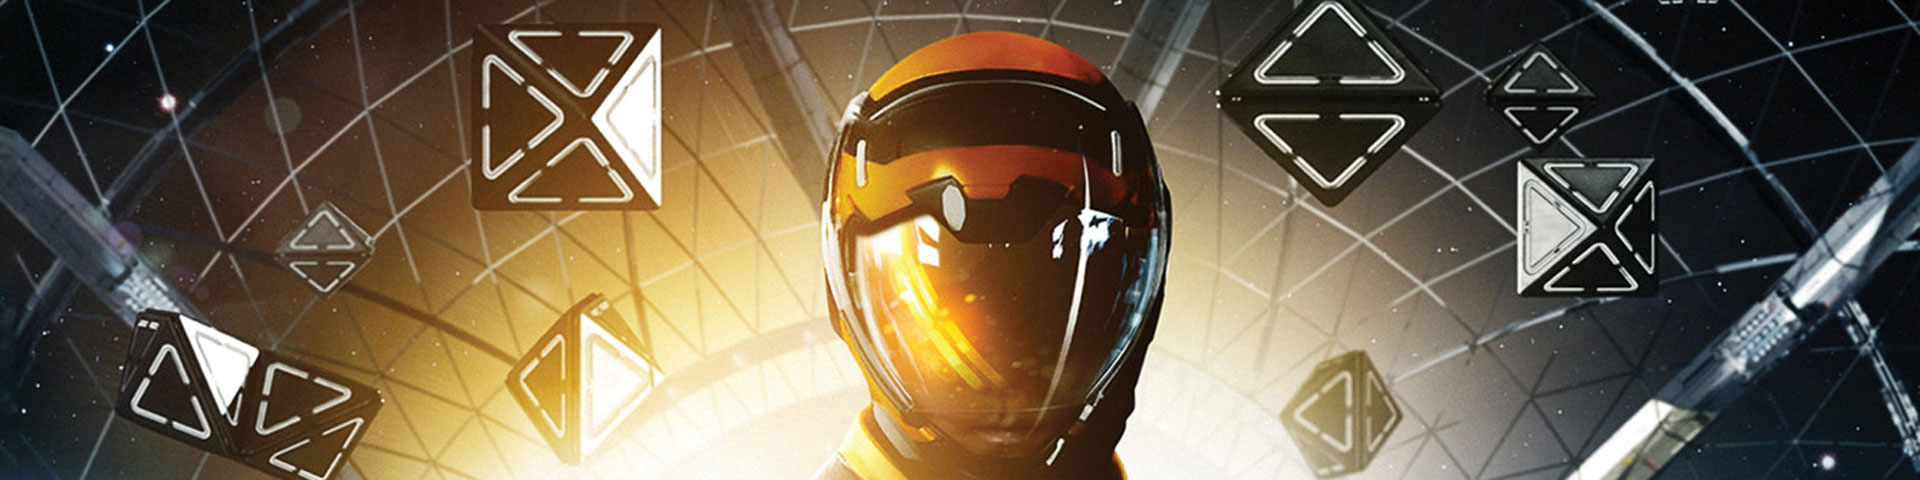 The helmet of a space-suited child appears in front of several geometric shapes.